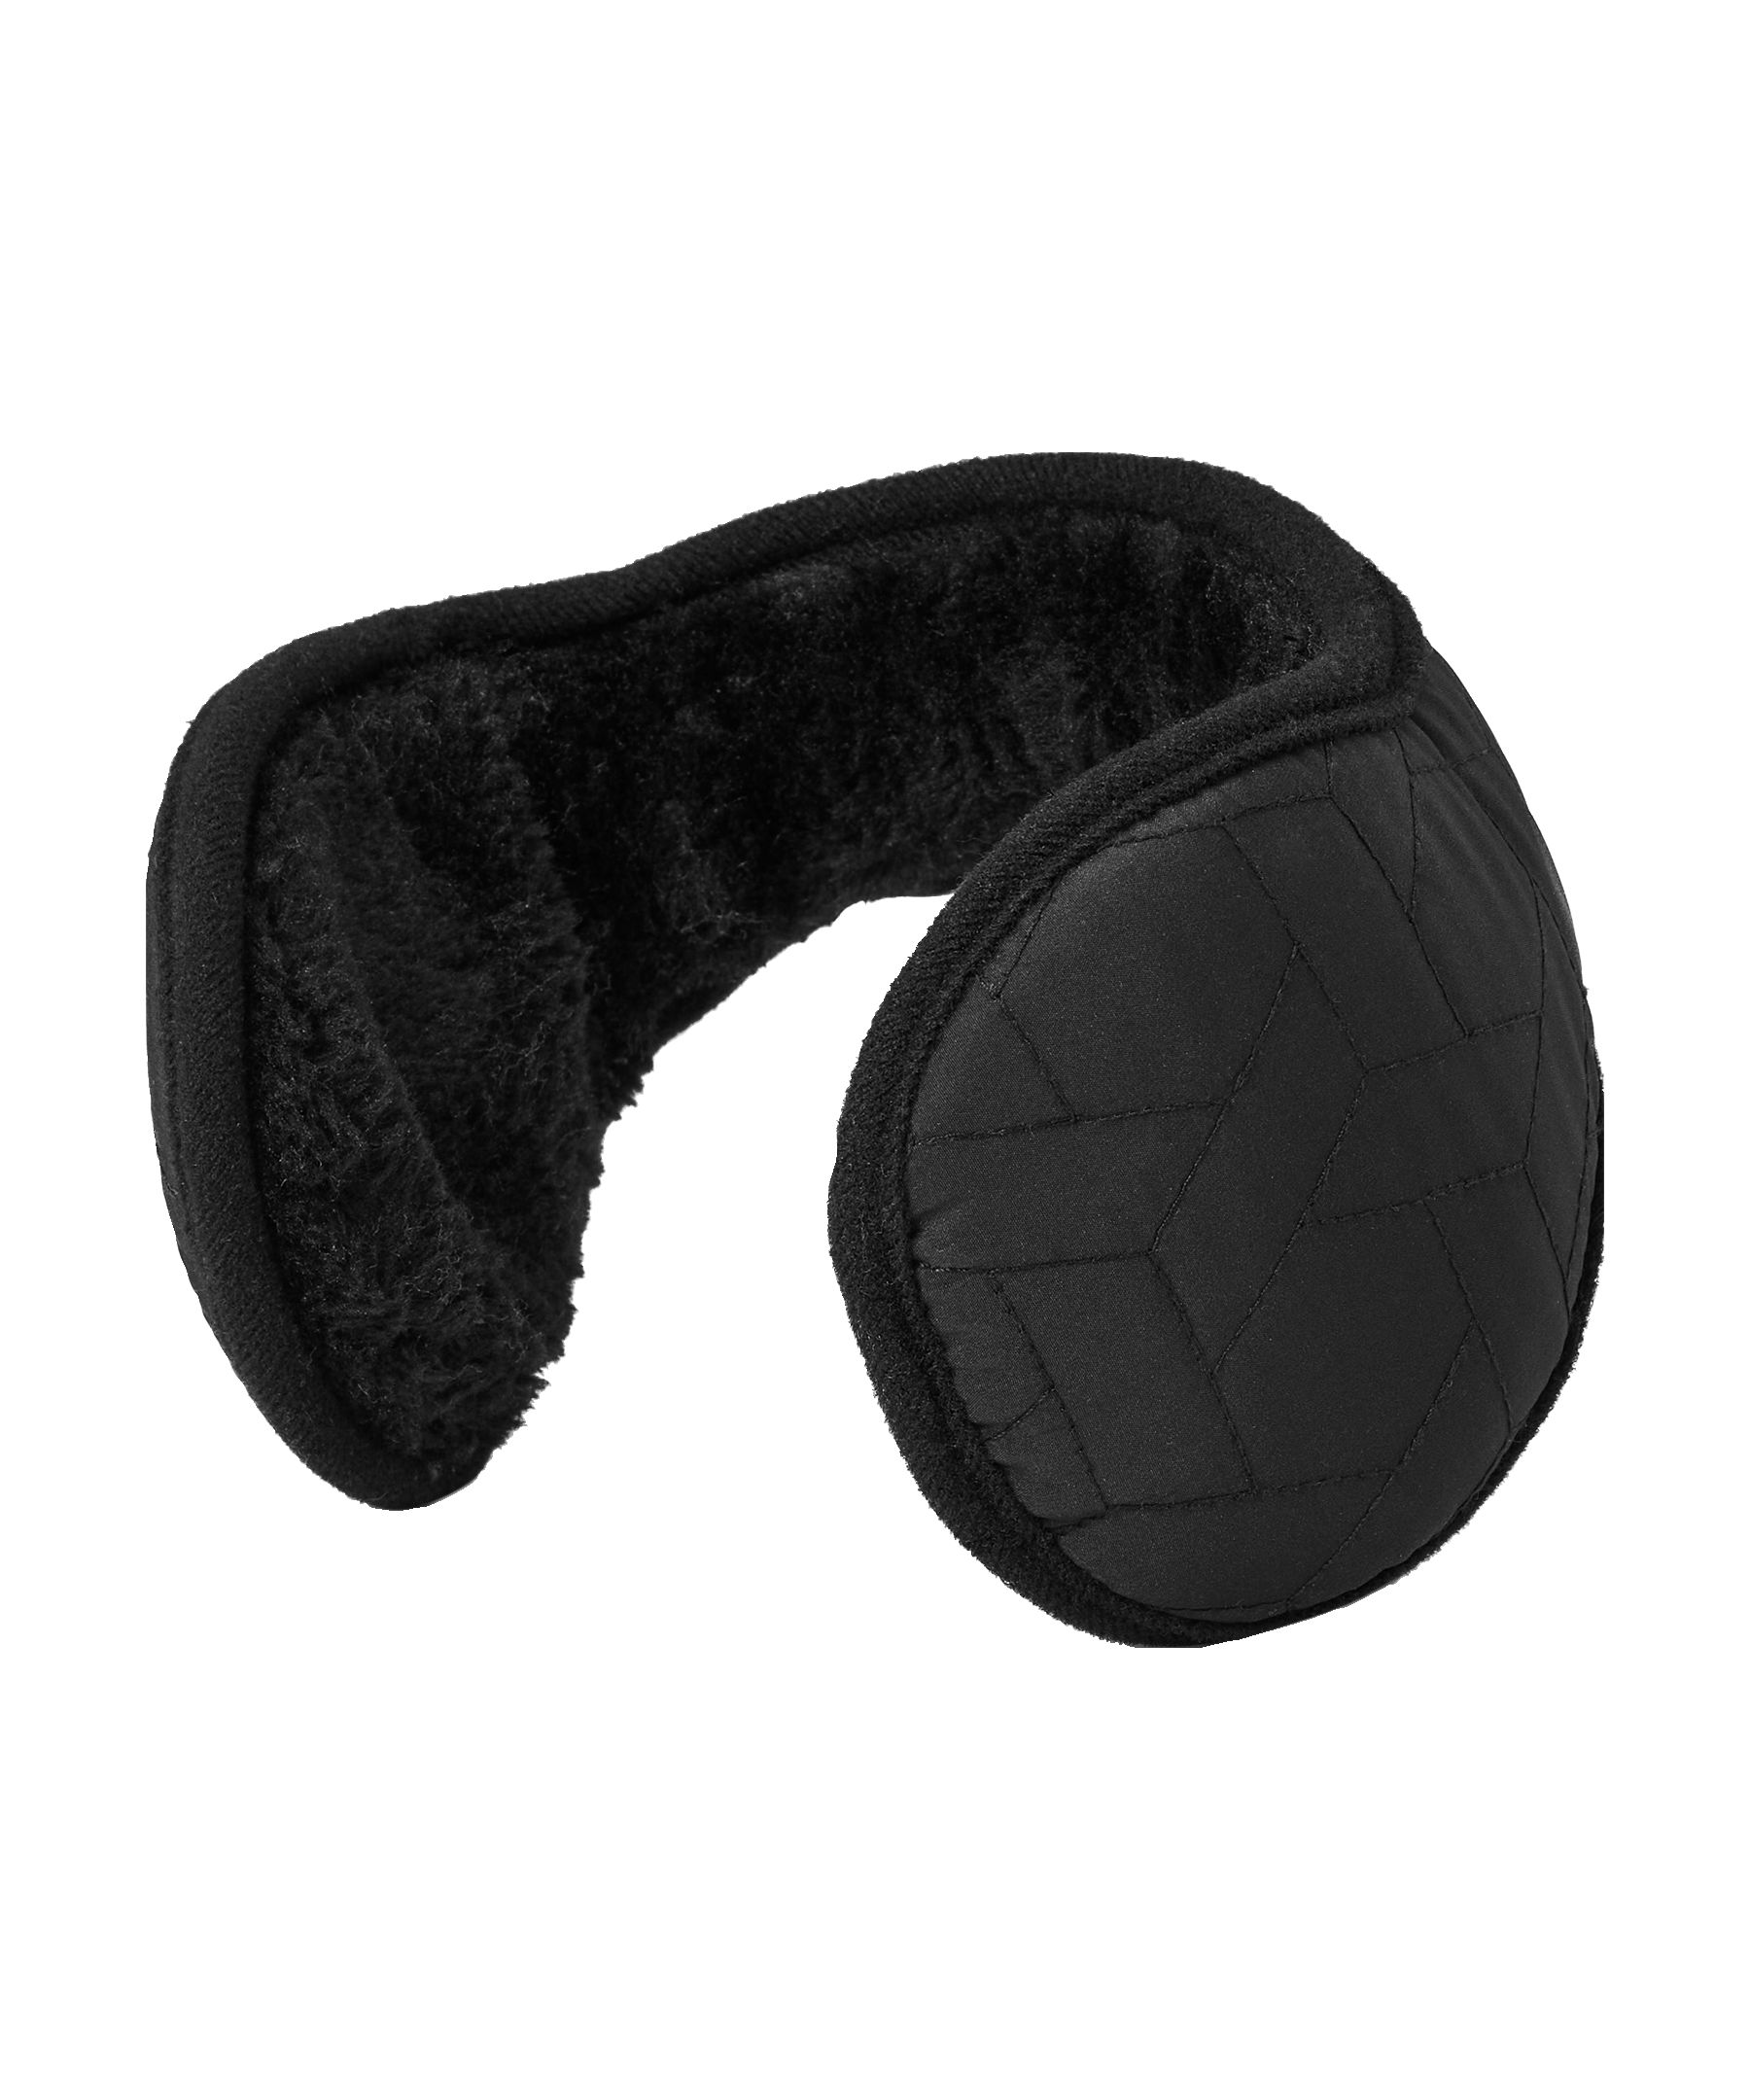 https://media-www.marks.com/product/marks-work-wearhouse/industrial-world/mens-accessories/410036871640/windriver-unisex-behind-the-head-band-ear-muffs-c9ae113b-6bd8-4be2-a3ed-f3b358e4469e-jpgrendition.jpg